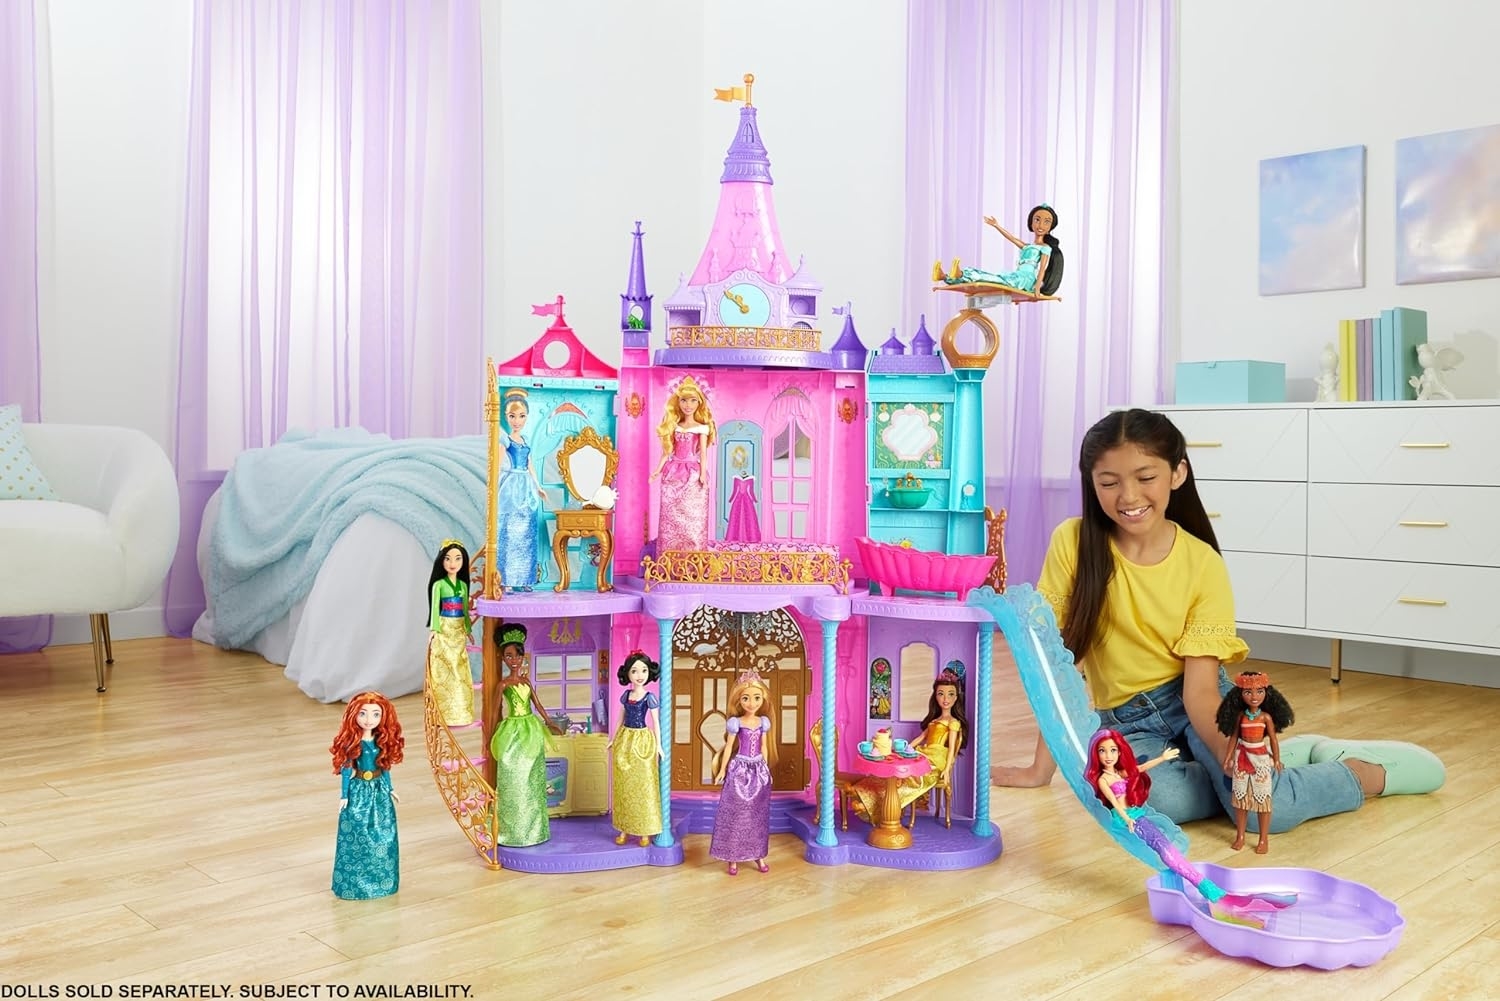 A child plays with a variety of dolls, including figures from Disney&#x27;s Frozen, in an elaborate toy castle playset